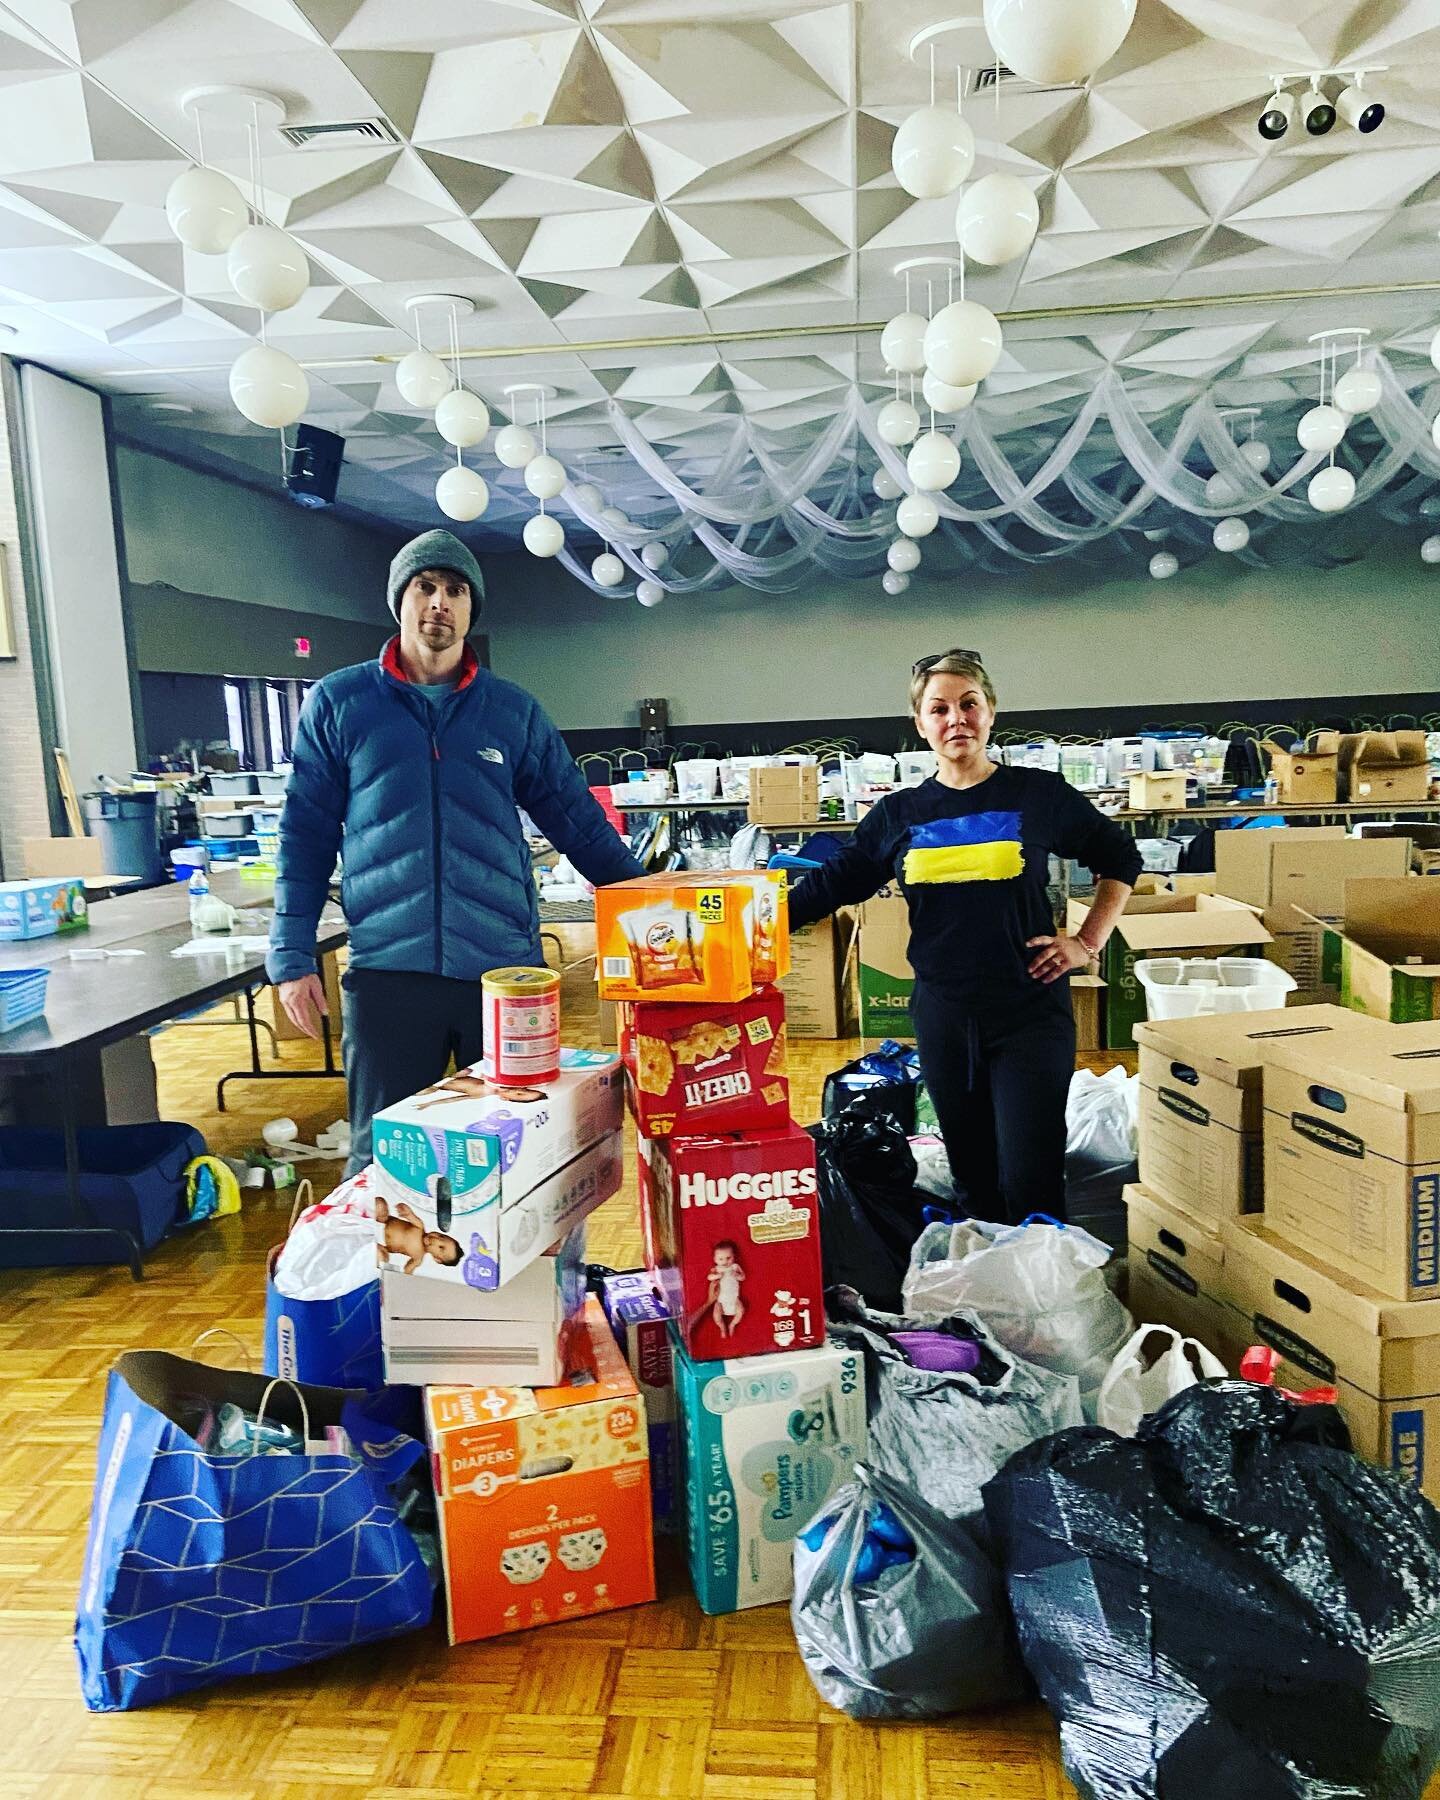 Thank you all! Thank you so much! Your donations mean so much to our gym, to Ukraine, and to the innocent people caught in a war who feel your generosity through all the necessities you are providing.  We will continue to collect, and to help and to 